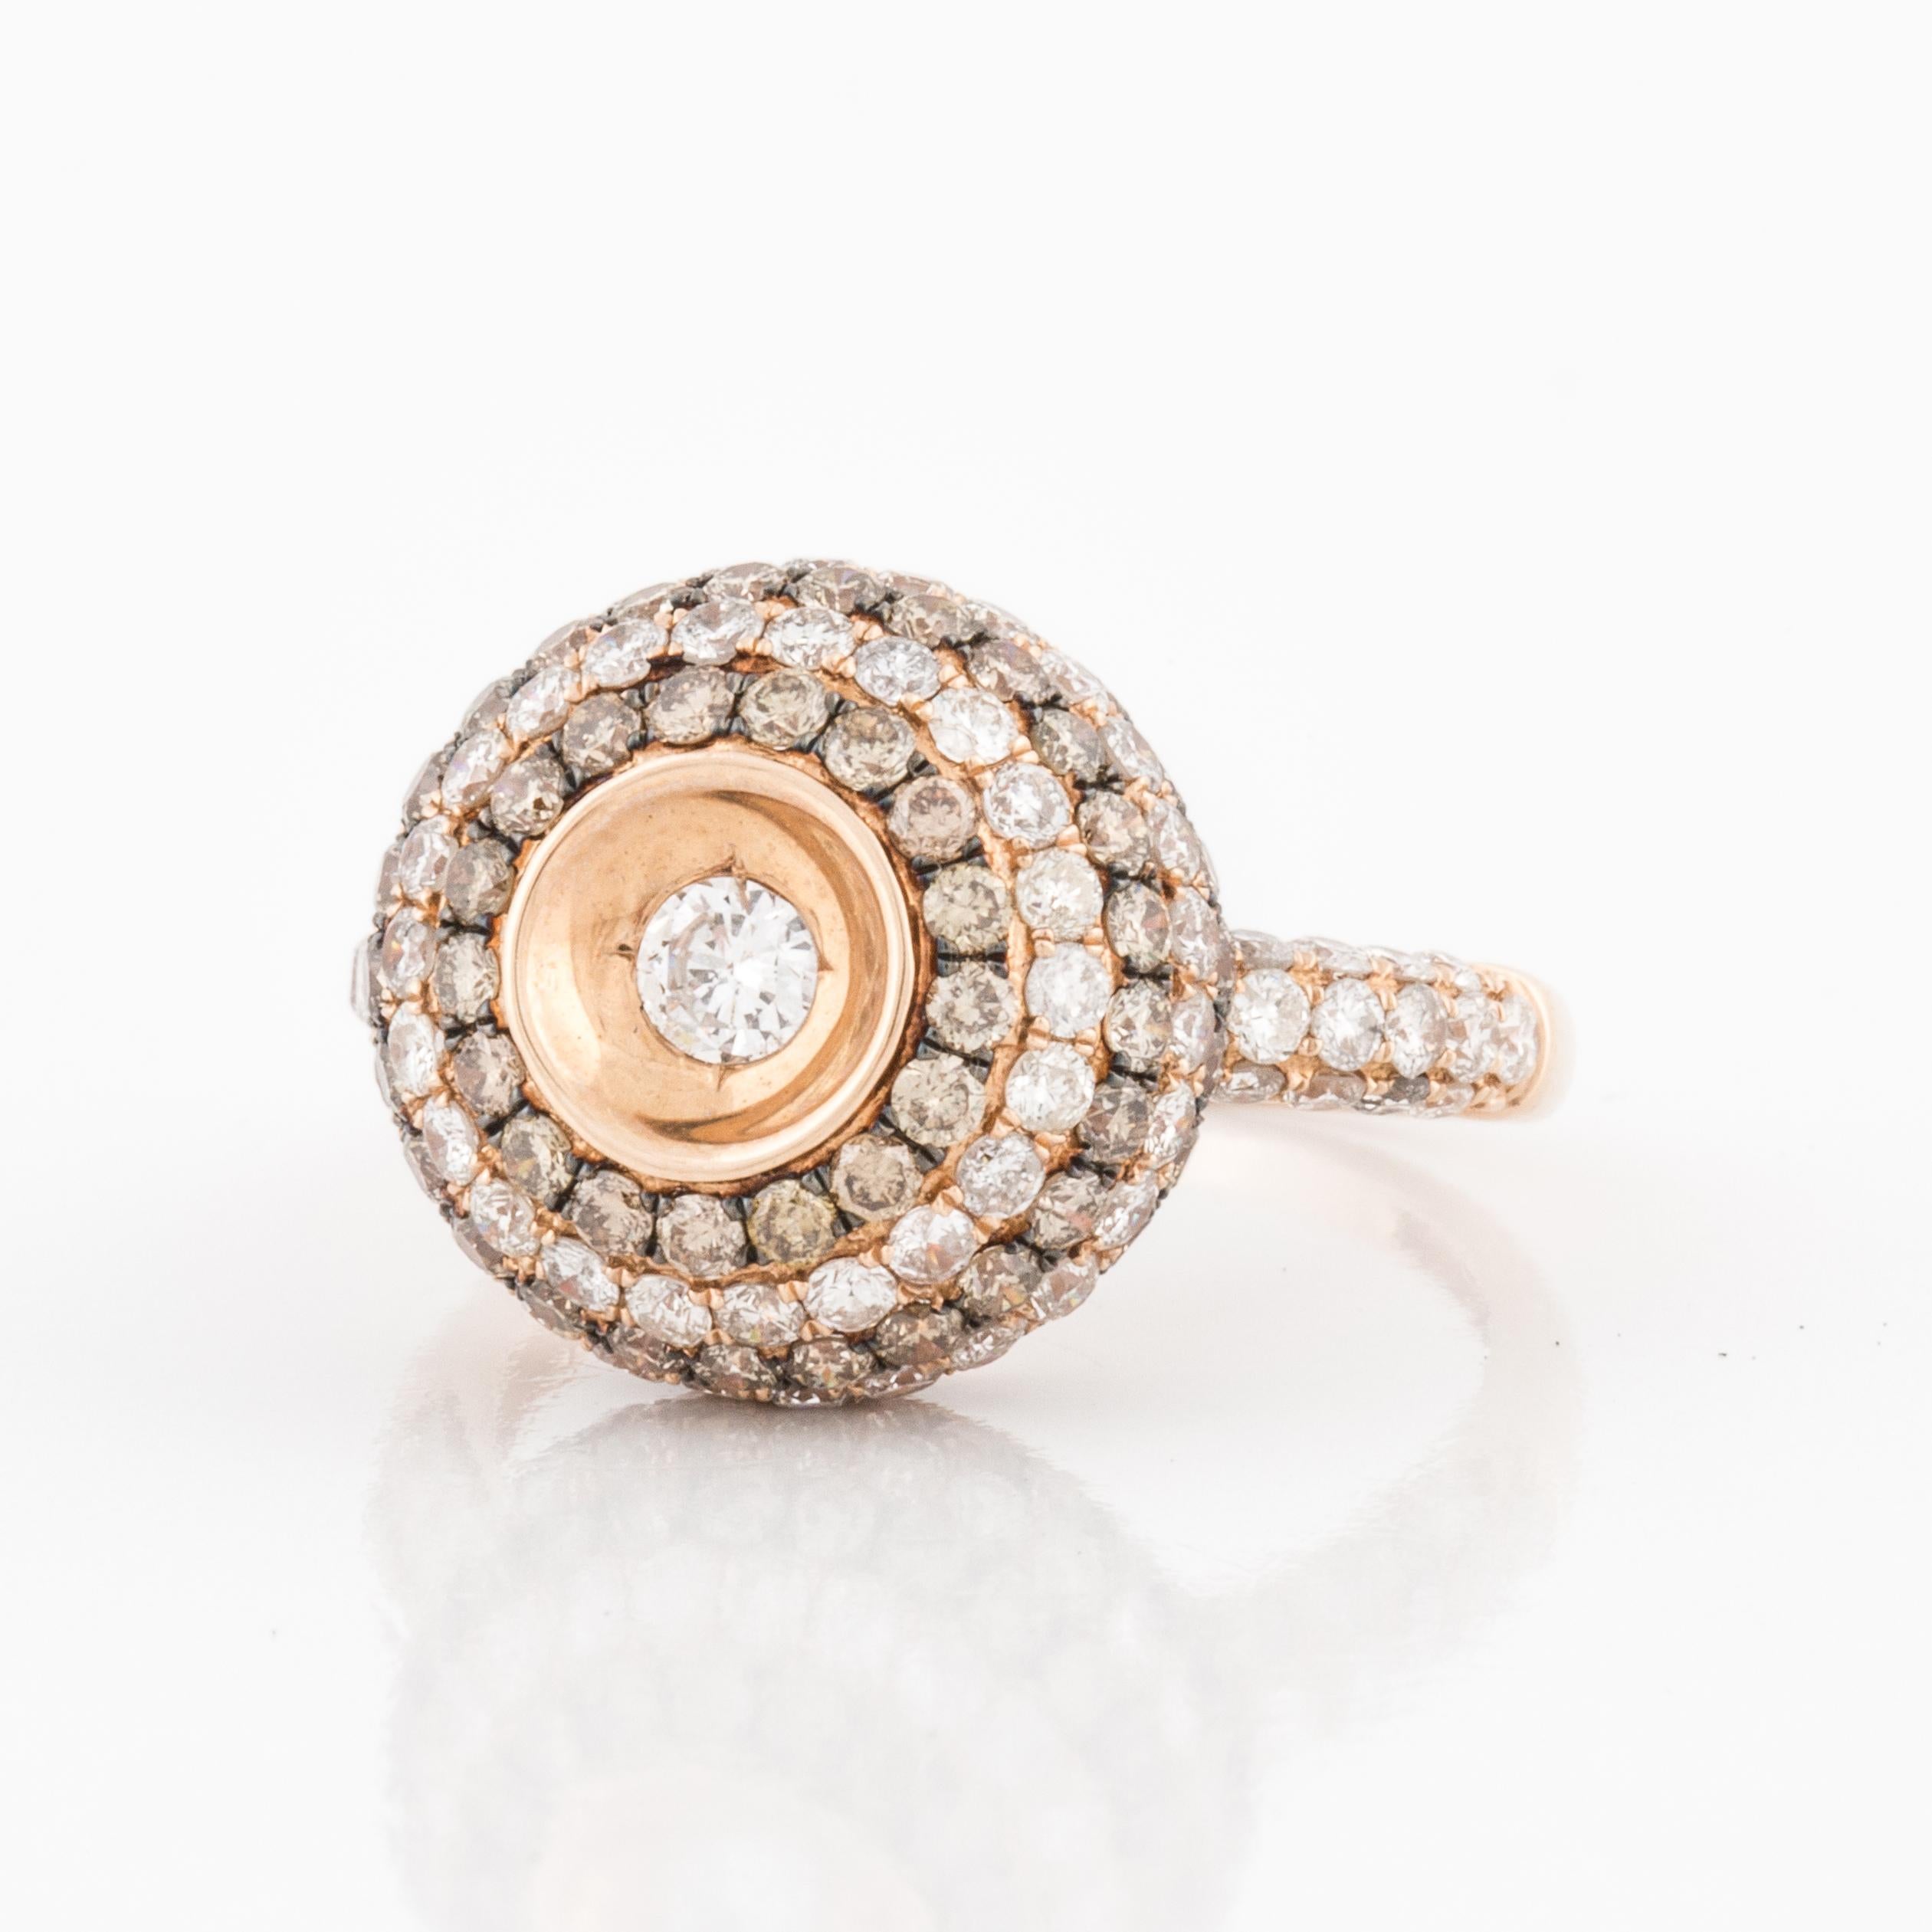 14K rose gold ring with brown and white diamonds.  There are 155 diamonds that total 3.05 carats.  The white diamonds are G-H color and VS2/I1 clarity and the remainder are fancy brown diamonds.  The sphere measures 5/8 inches across and it is 5/16